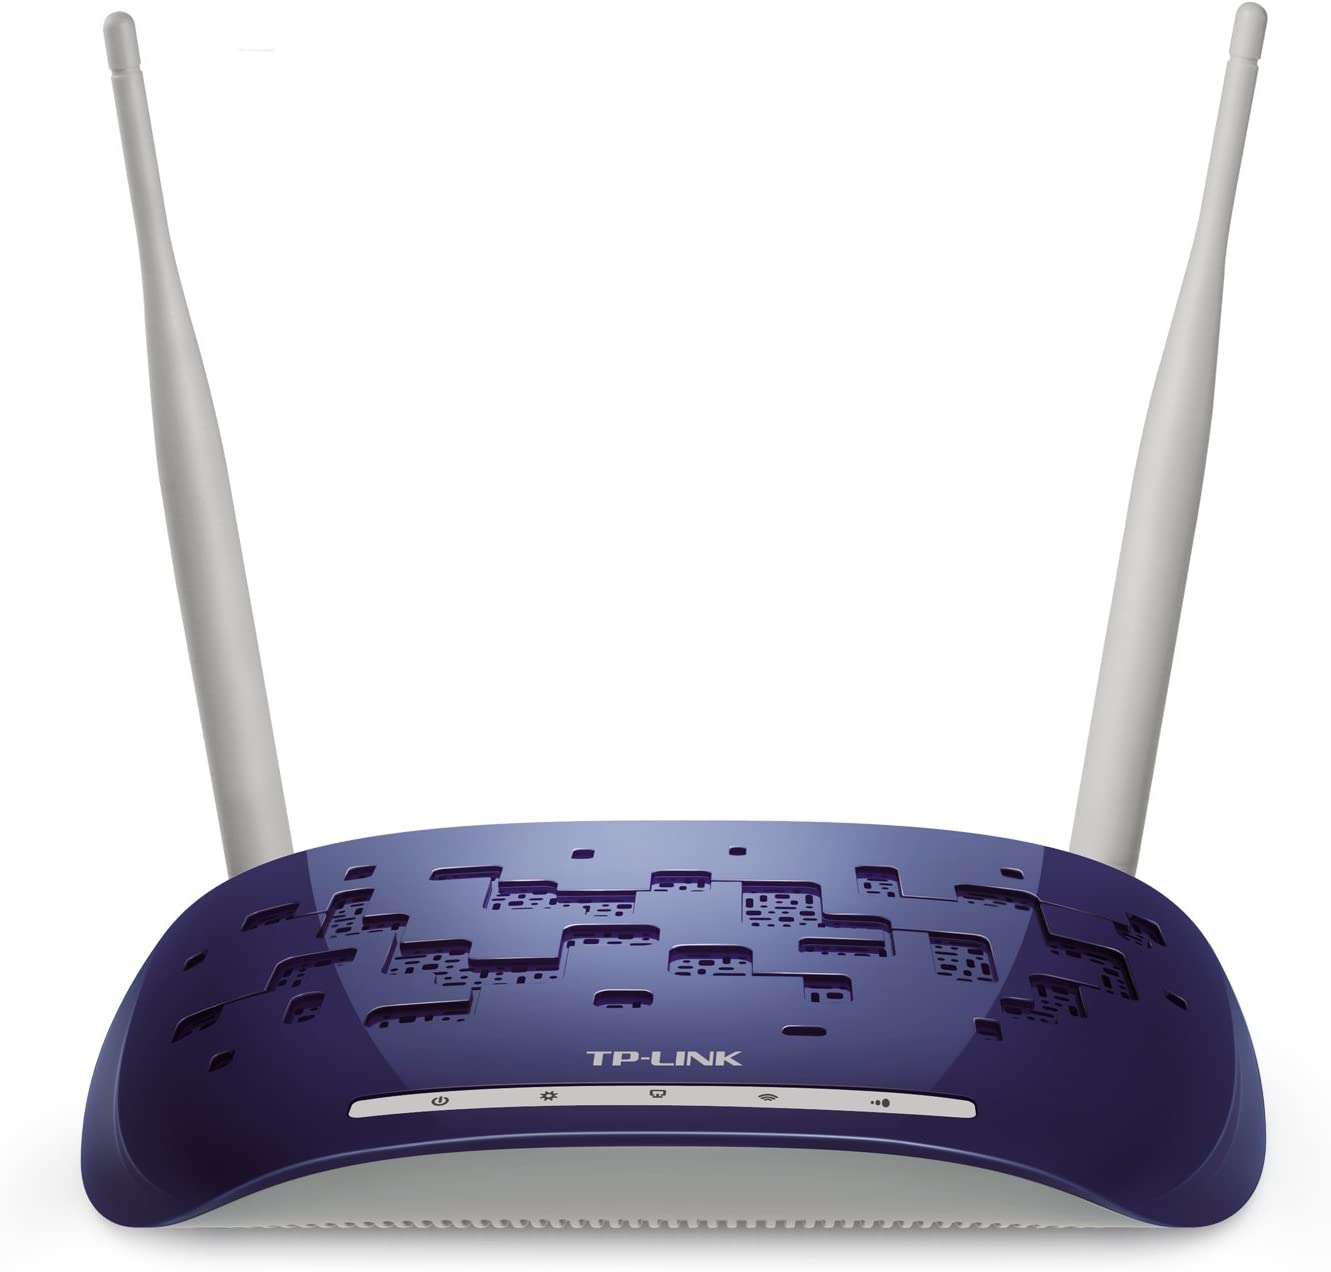 Roteador/Acess Point Tp-Link TL-WA830RE 300MBPS Rage Extender